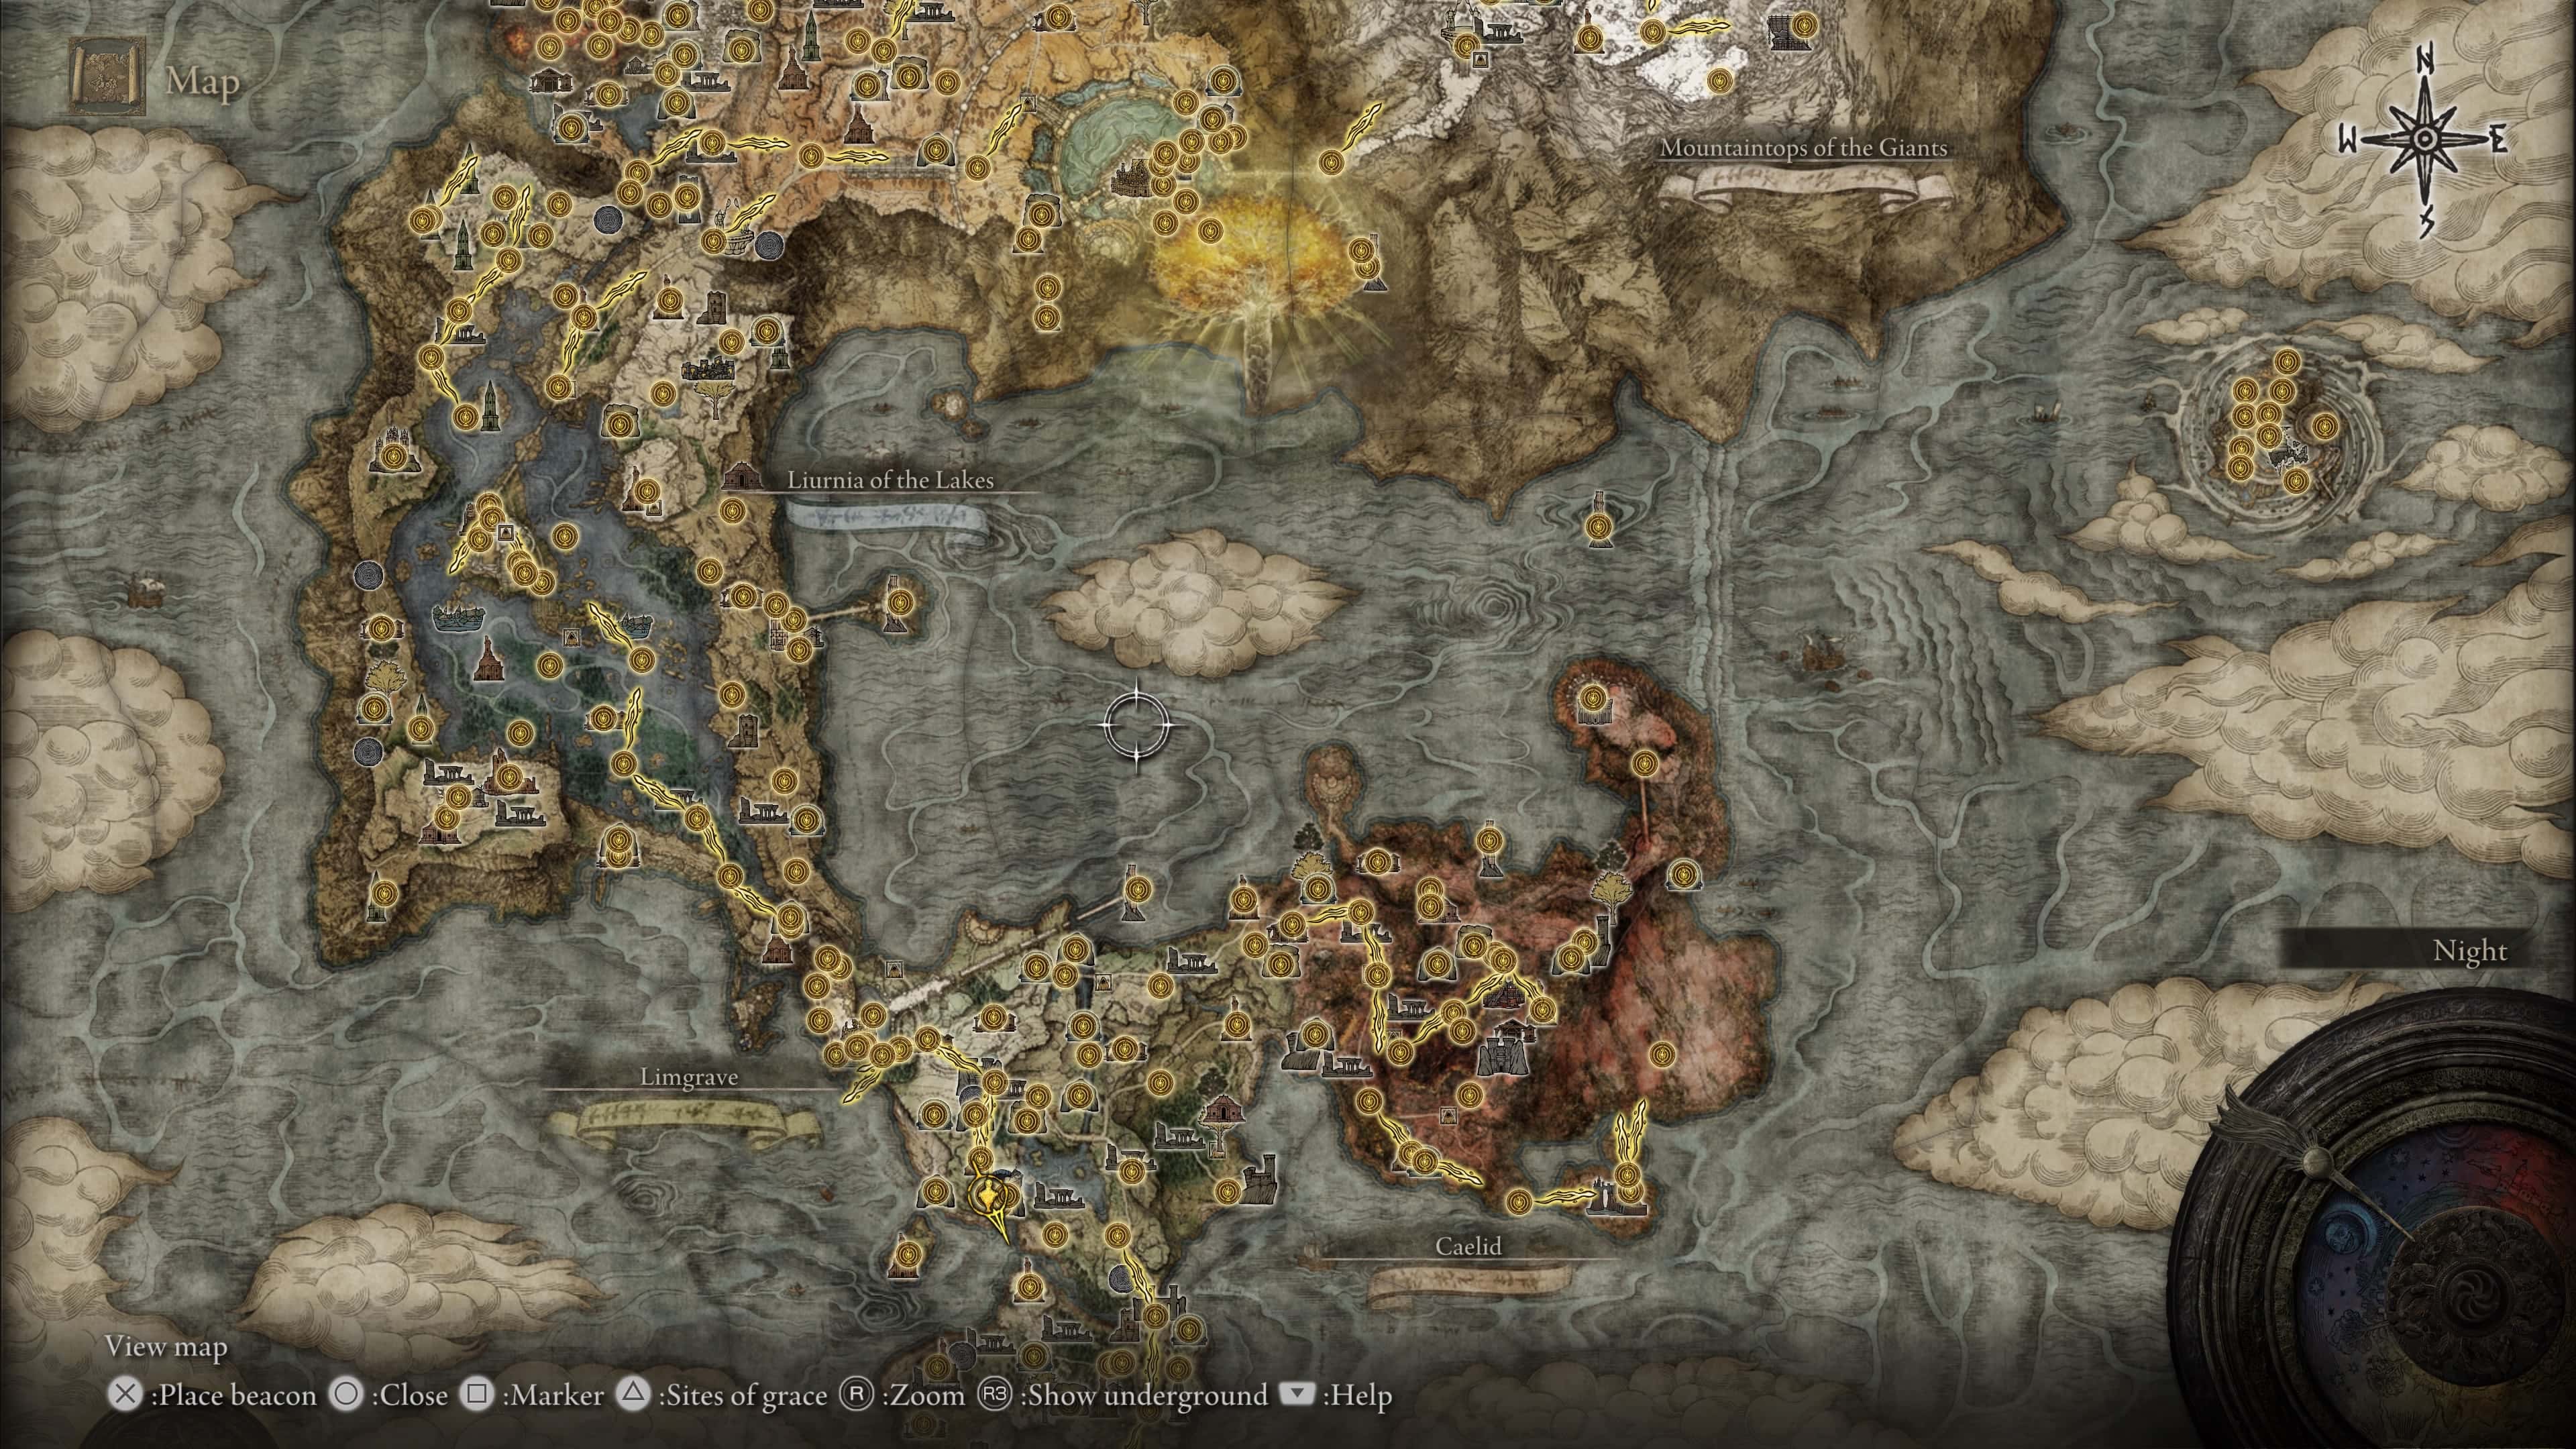 elden ring setting: Where is Elden Ring set? Image shows the entire map of Elden Ring